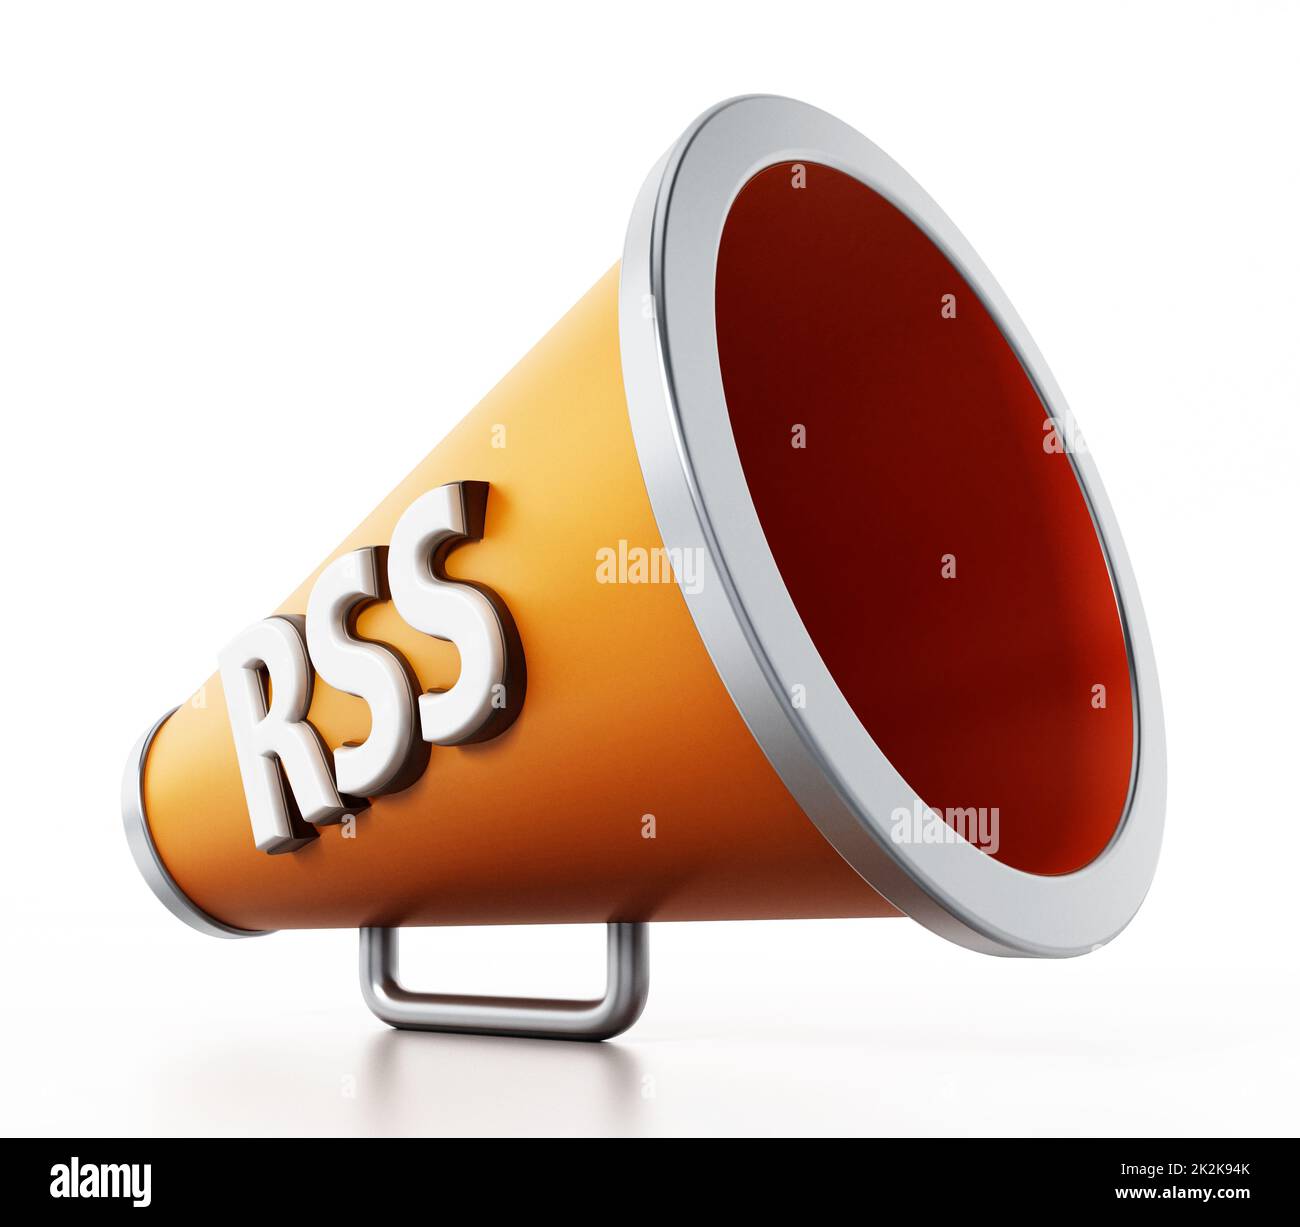 Rss background hi-res stock photography and images - Alamy